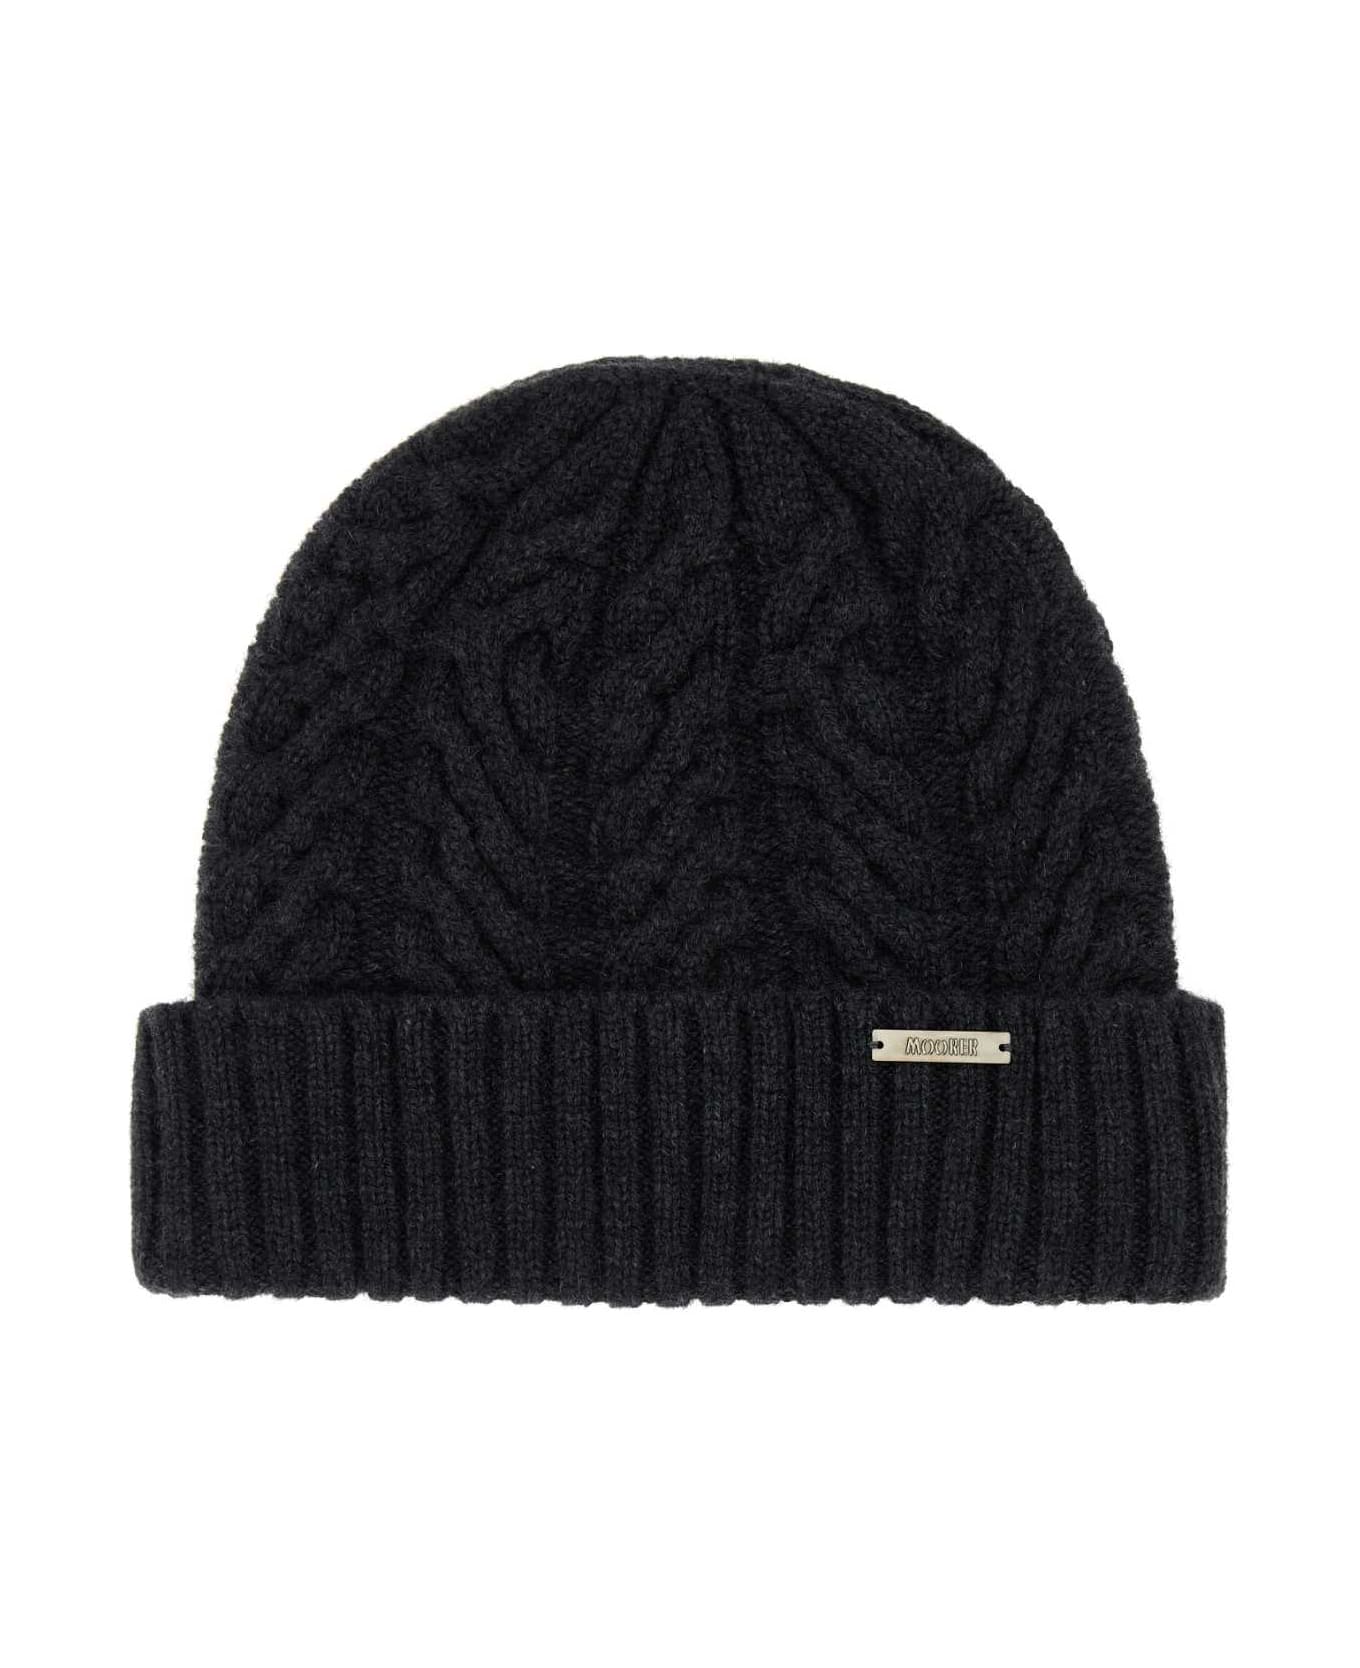 Moorer Charcoal Cashmere Beanie Hat - CARBON